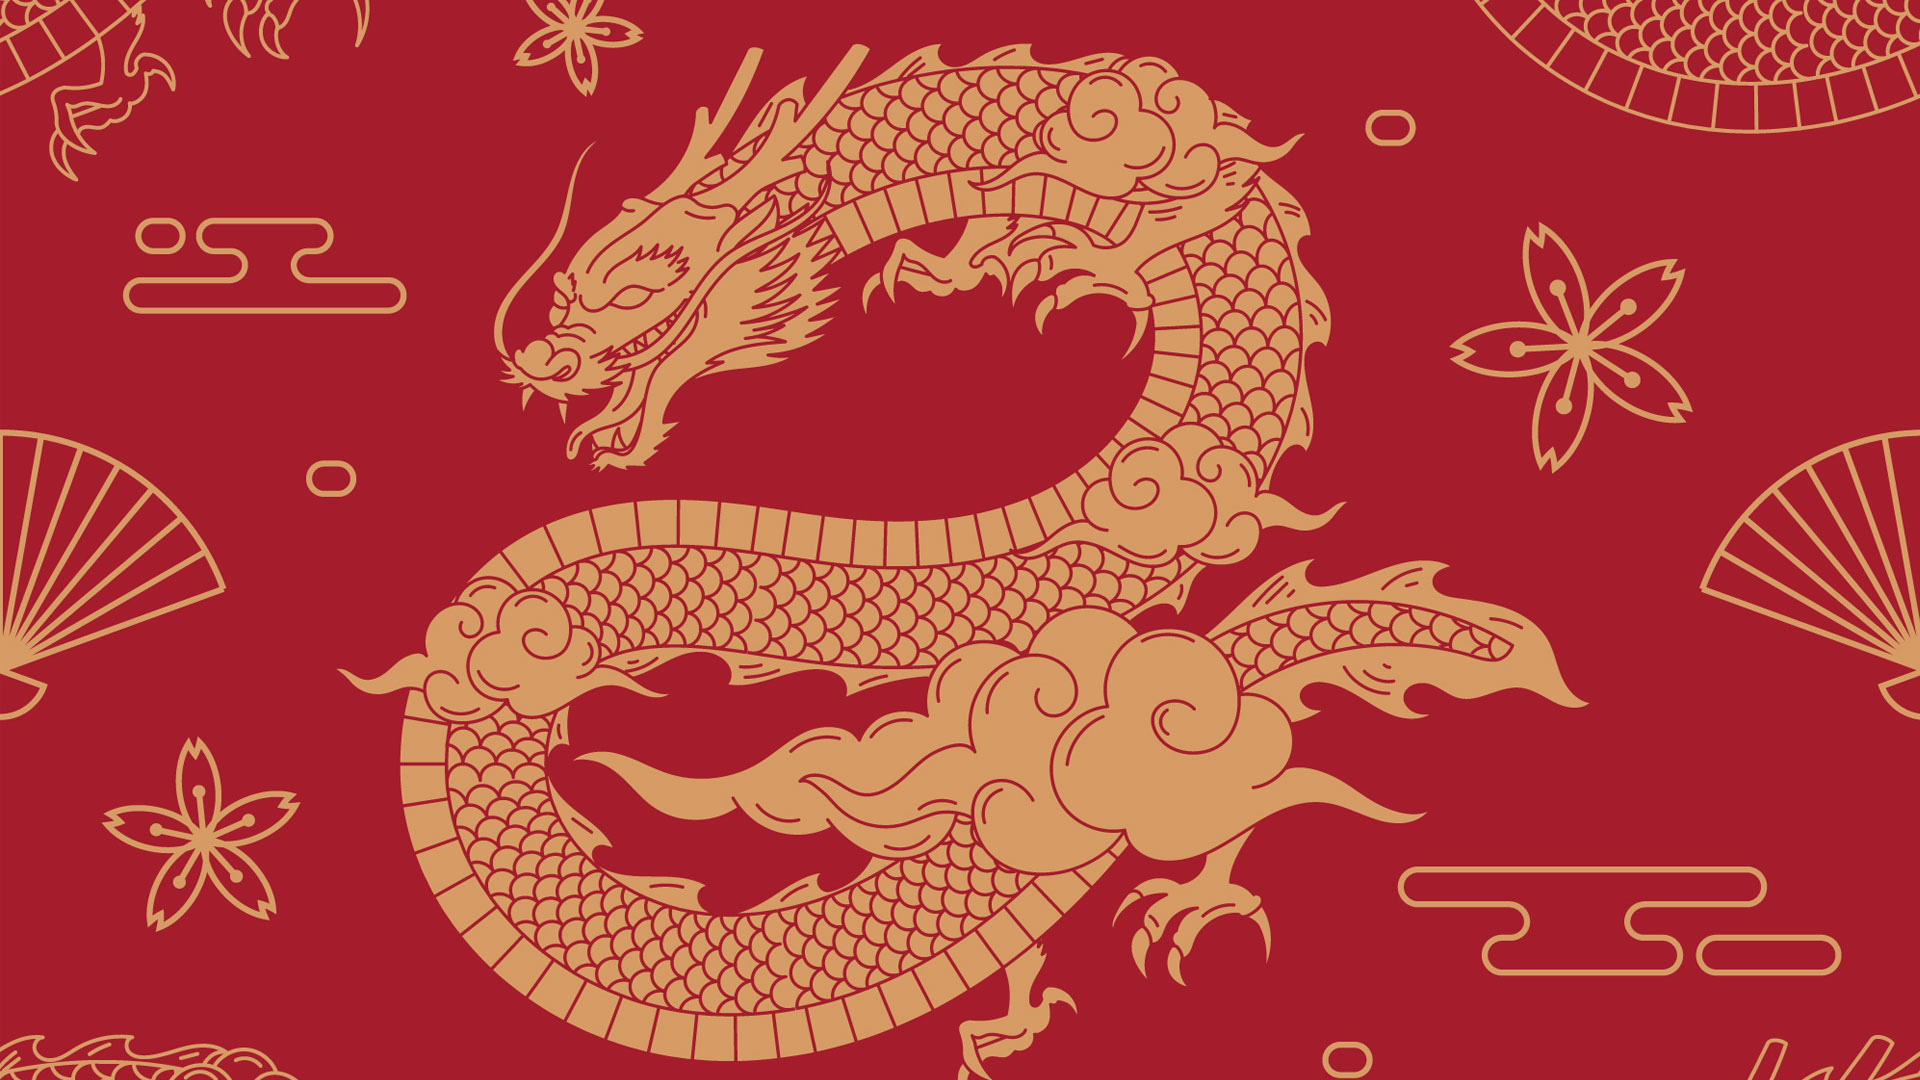 On The Ninth Day of the Lunar New Year, a Fresh Start!